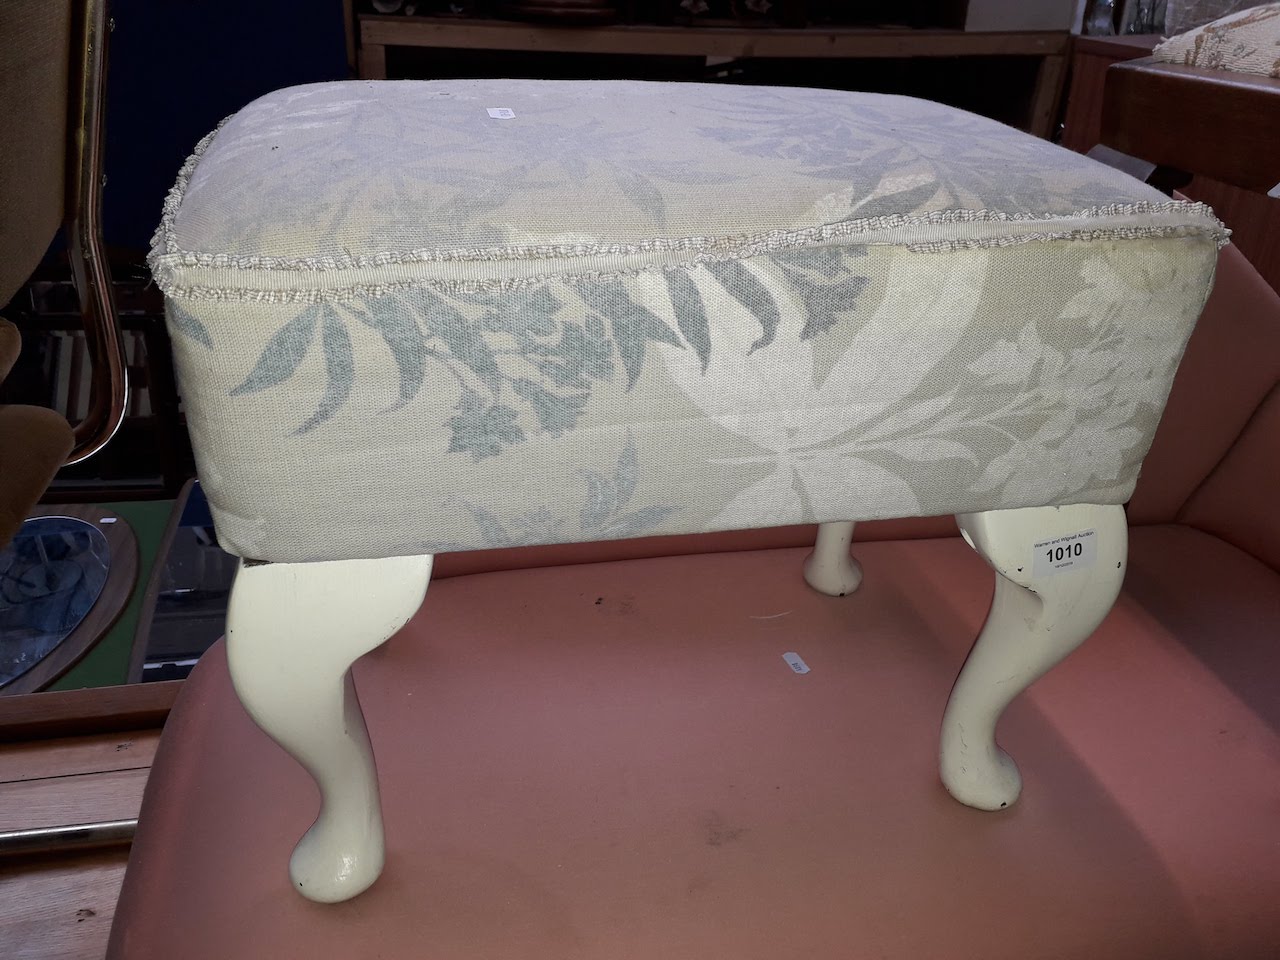 An upholstered foot stool